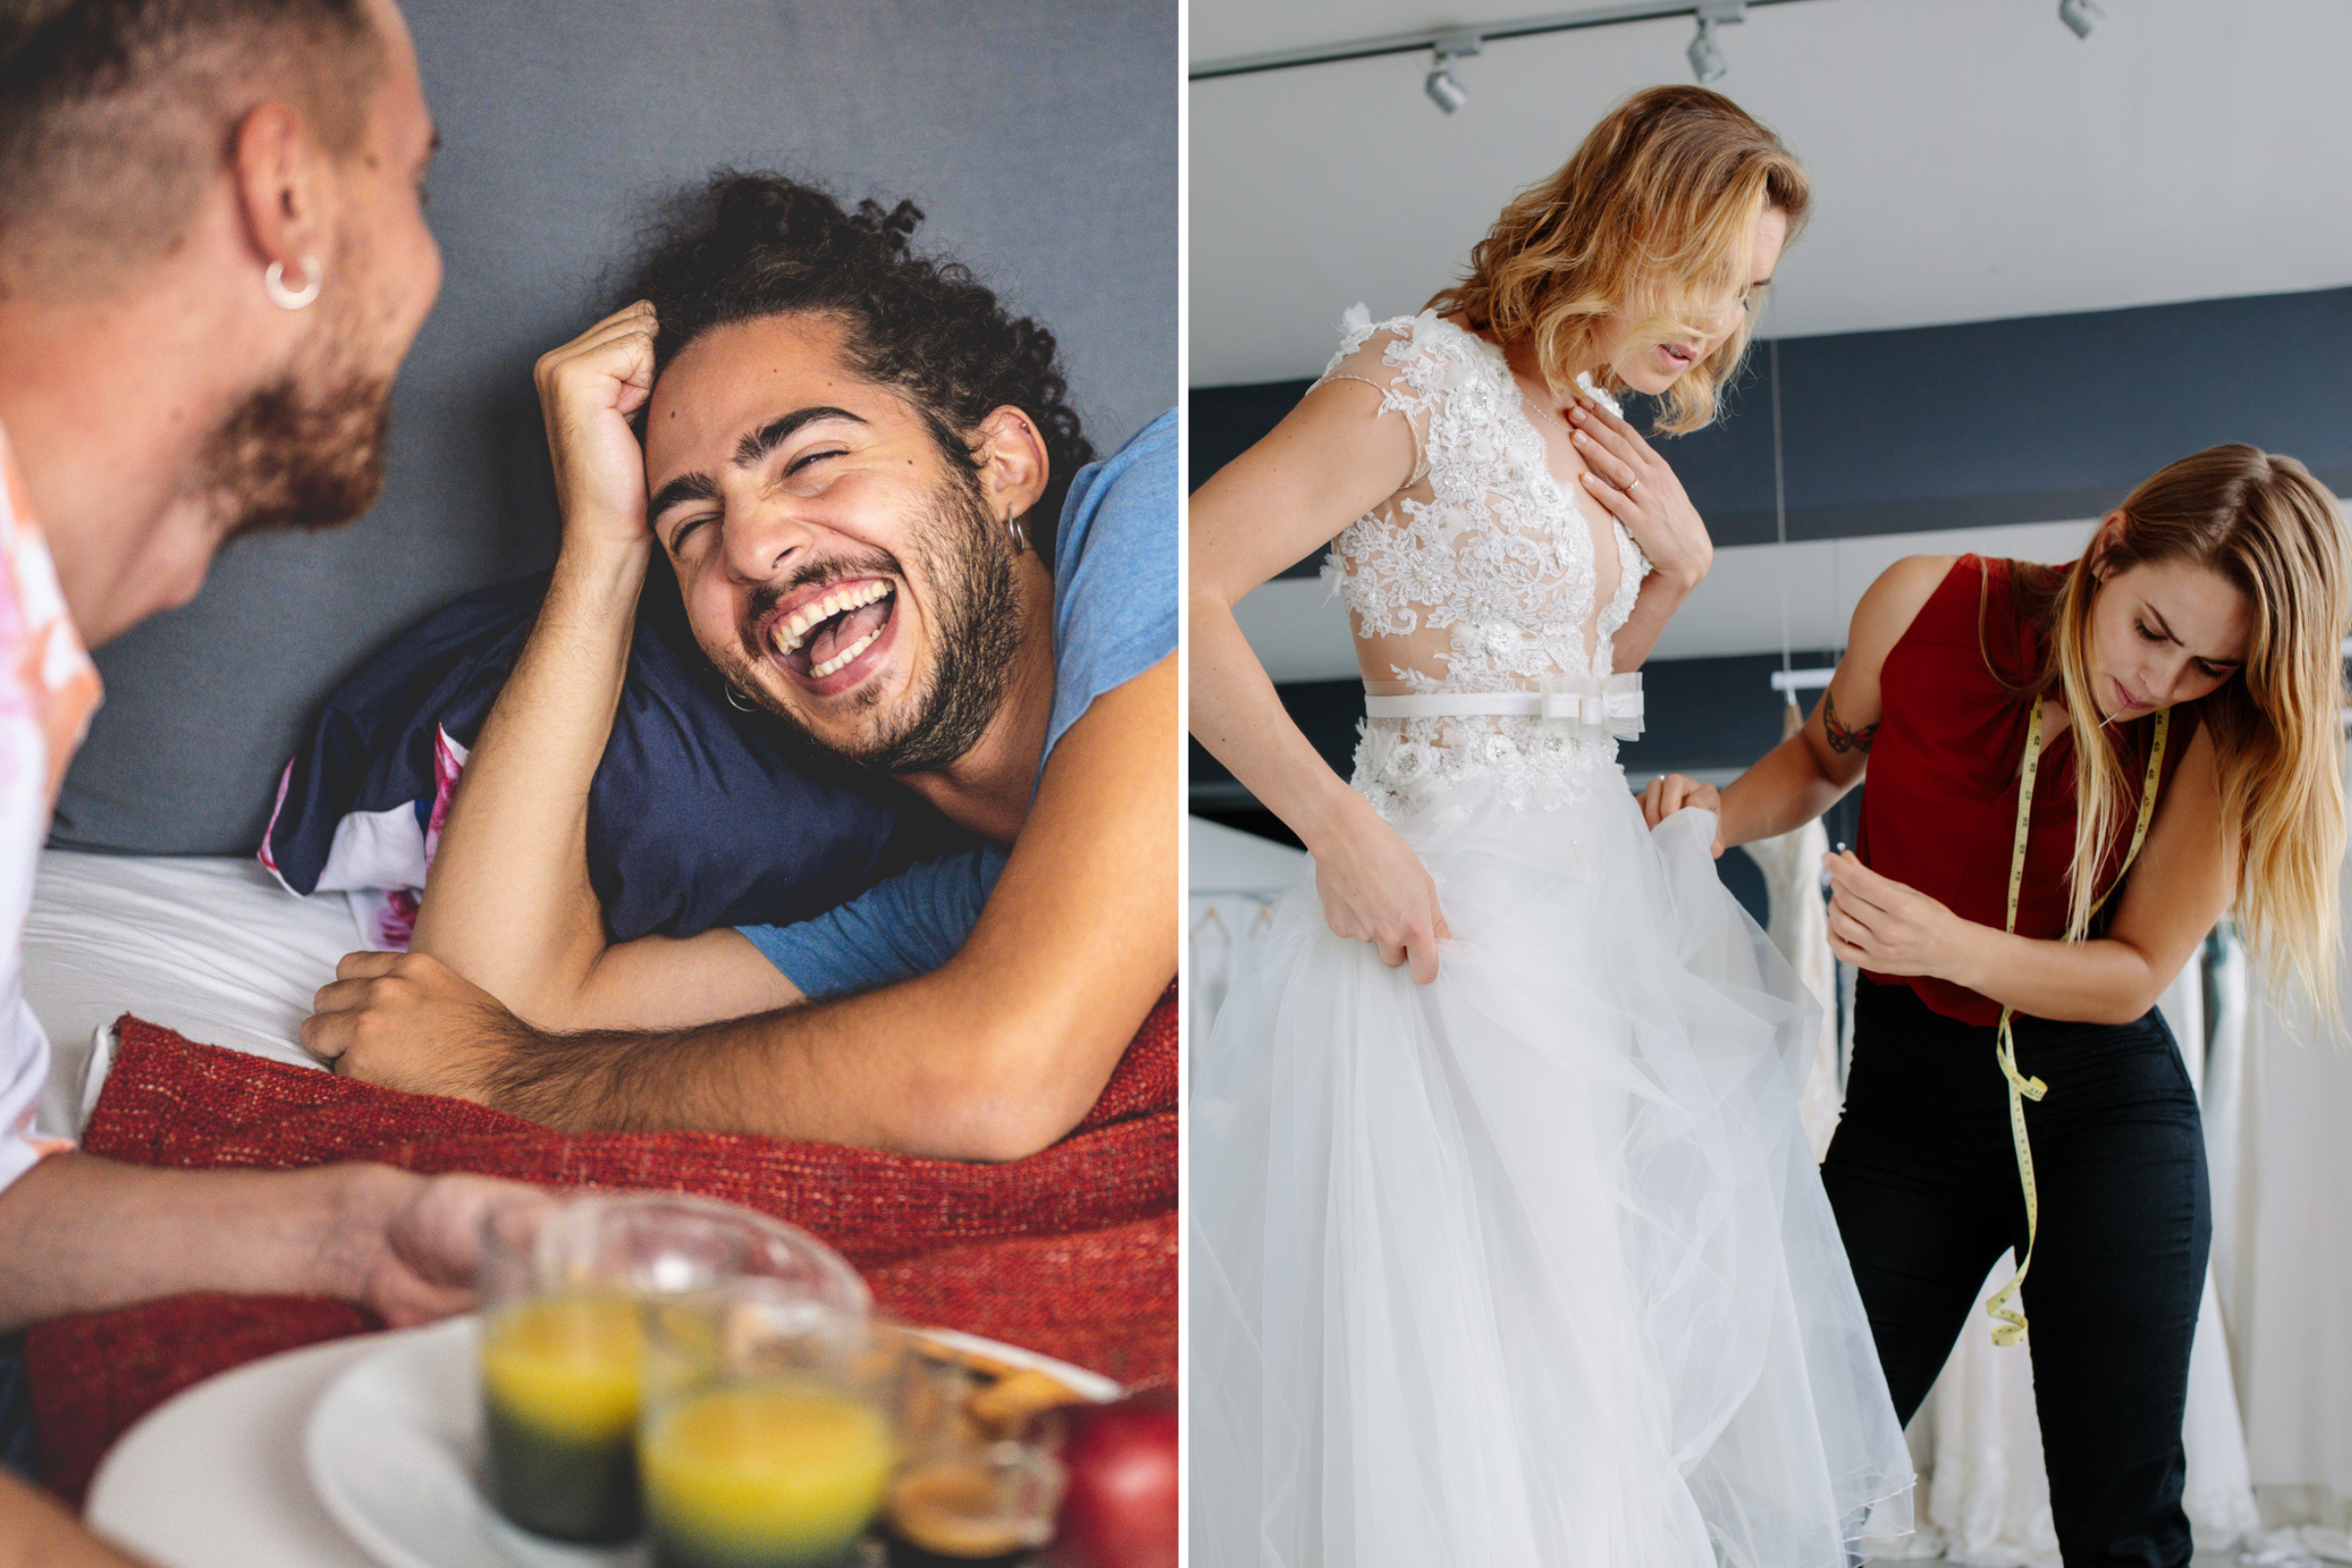 Arizona bride fools groom by sending brother in her place for 'first look'  photos | king5.com